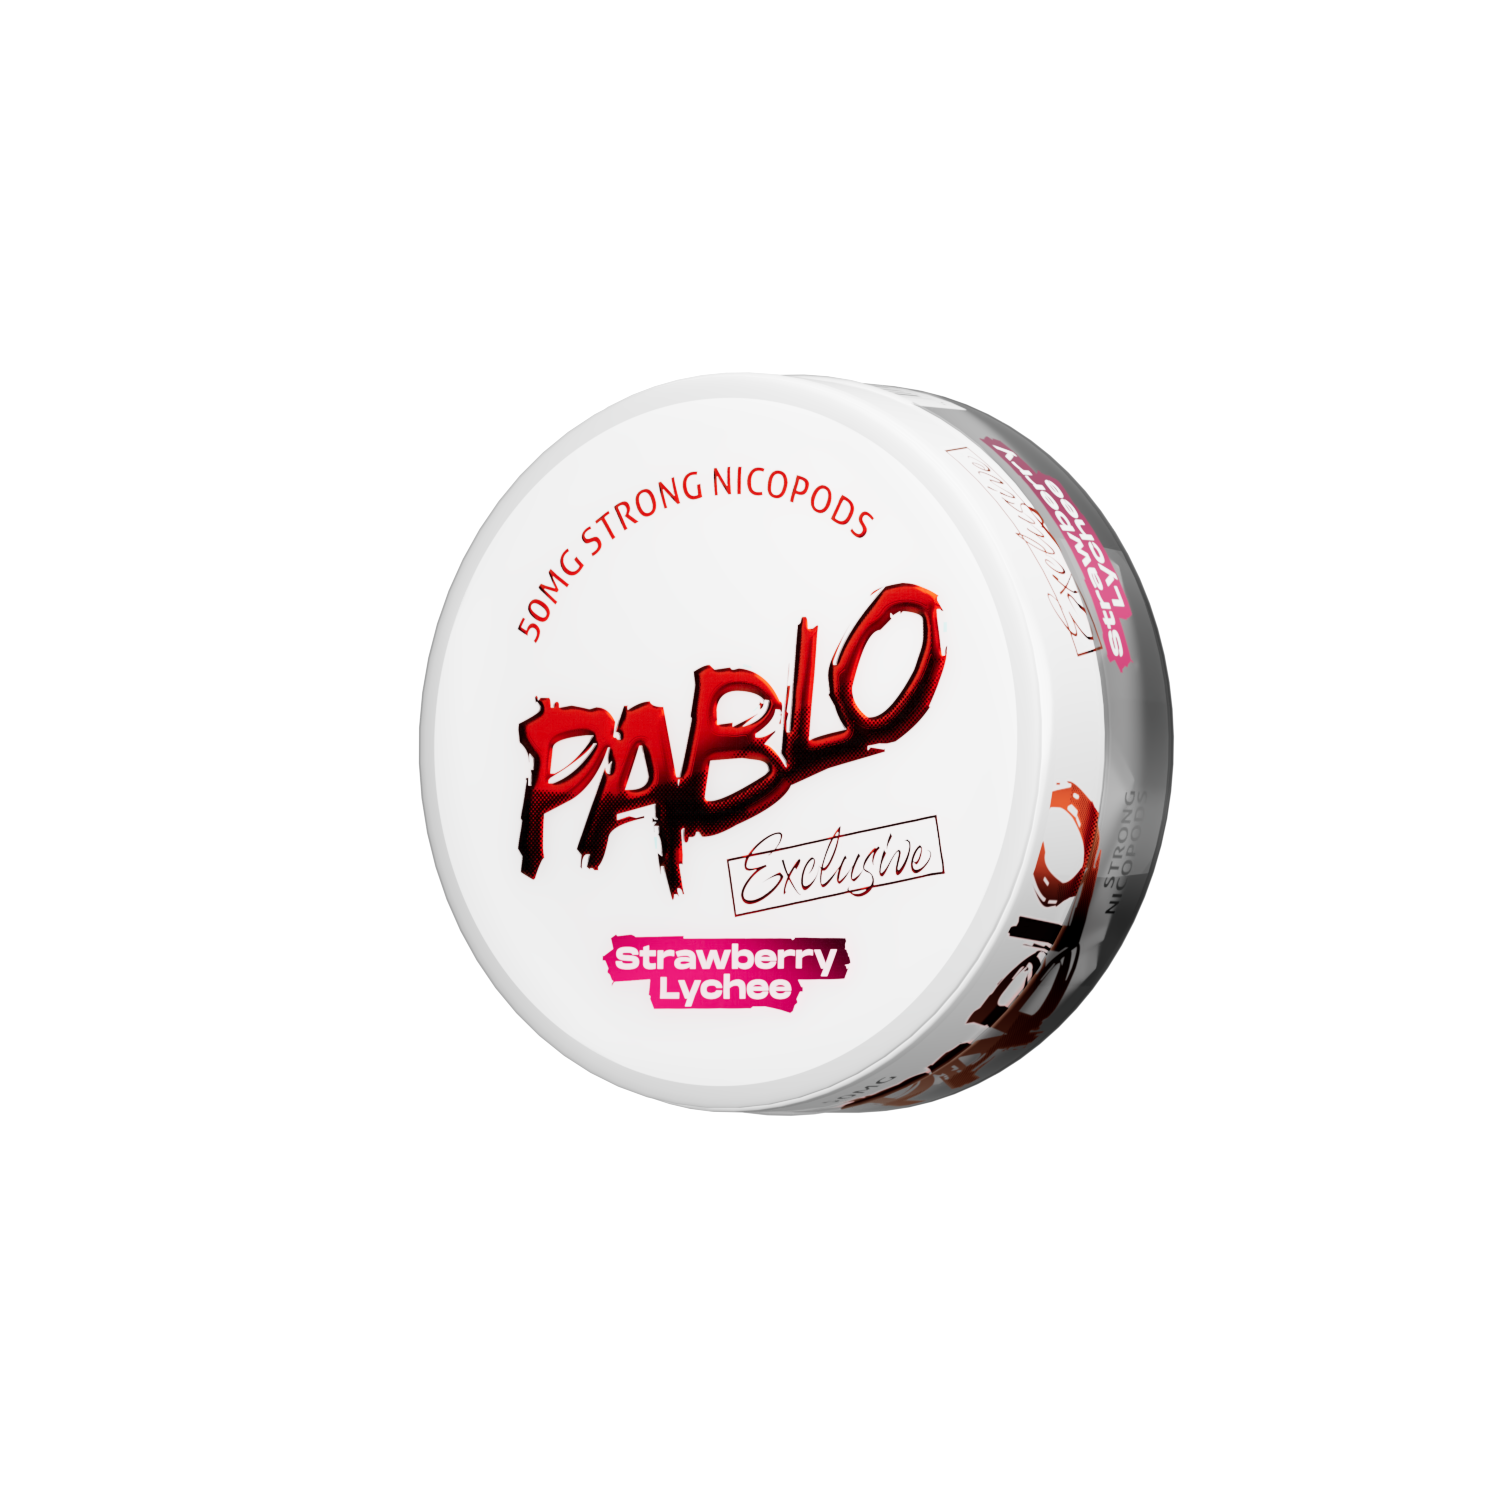 Pablo_Excl_StrawberryLychee_UUS_4